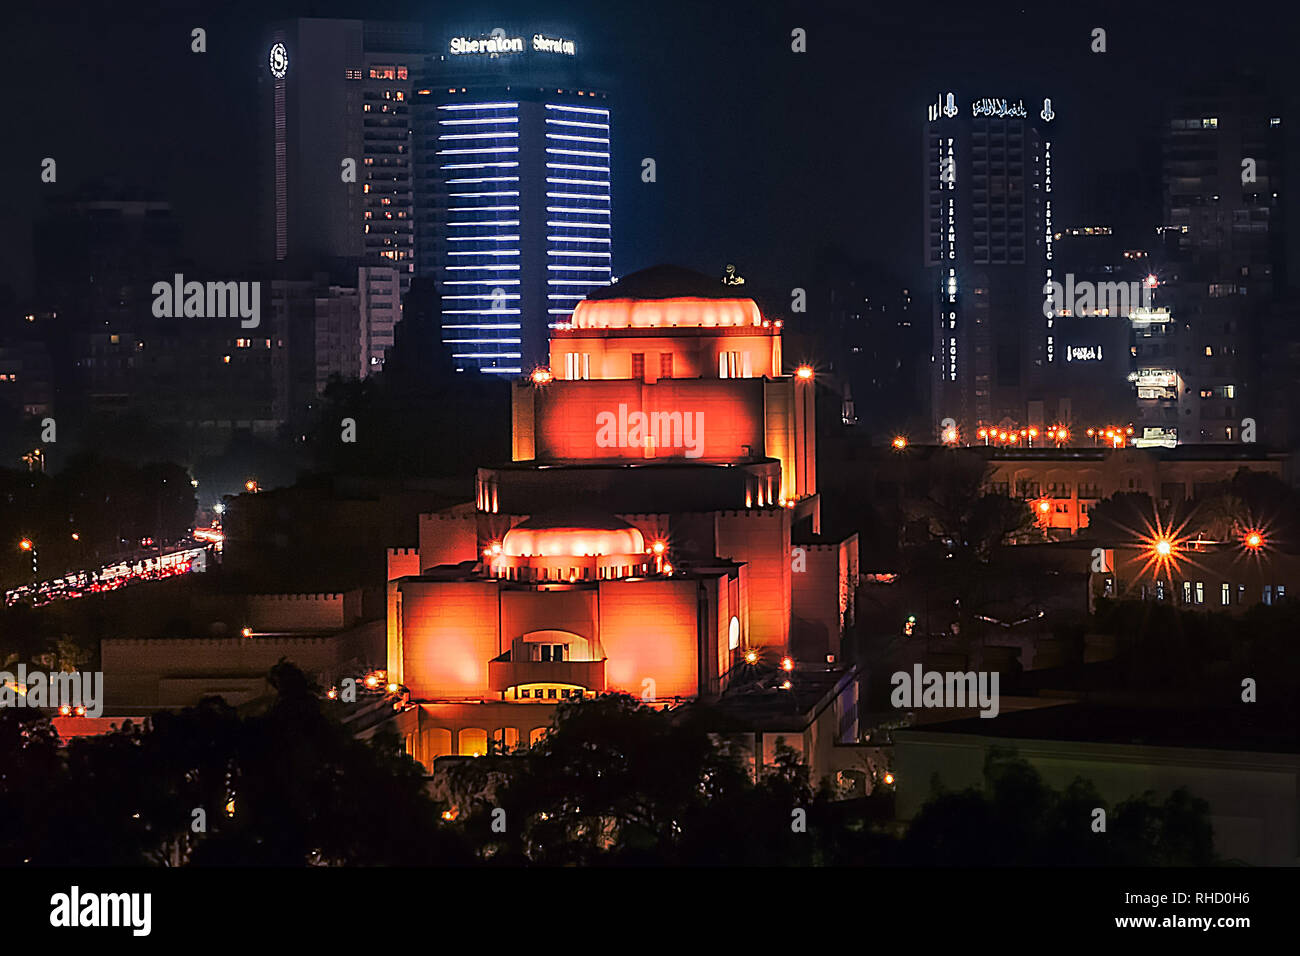 Cairo/Egypt - 04/15/2018: Night long exposure shot for Cairo Opera house and lights in Cairo Egypt Stock Photo